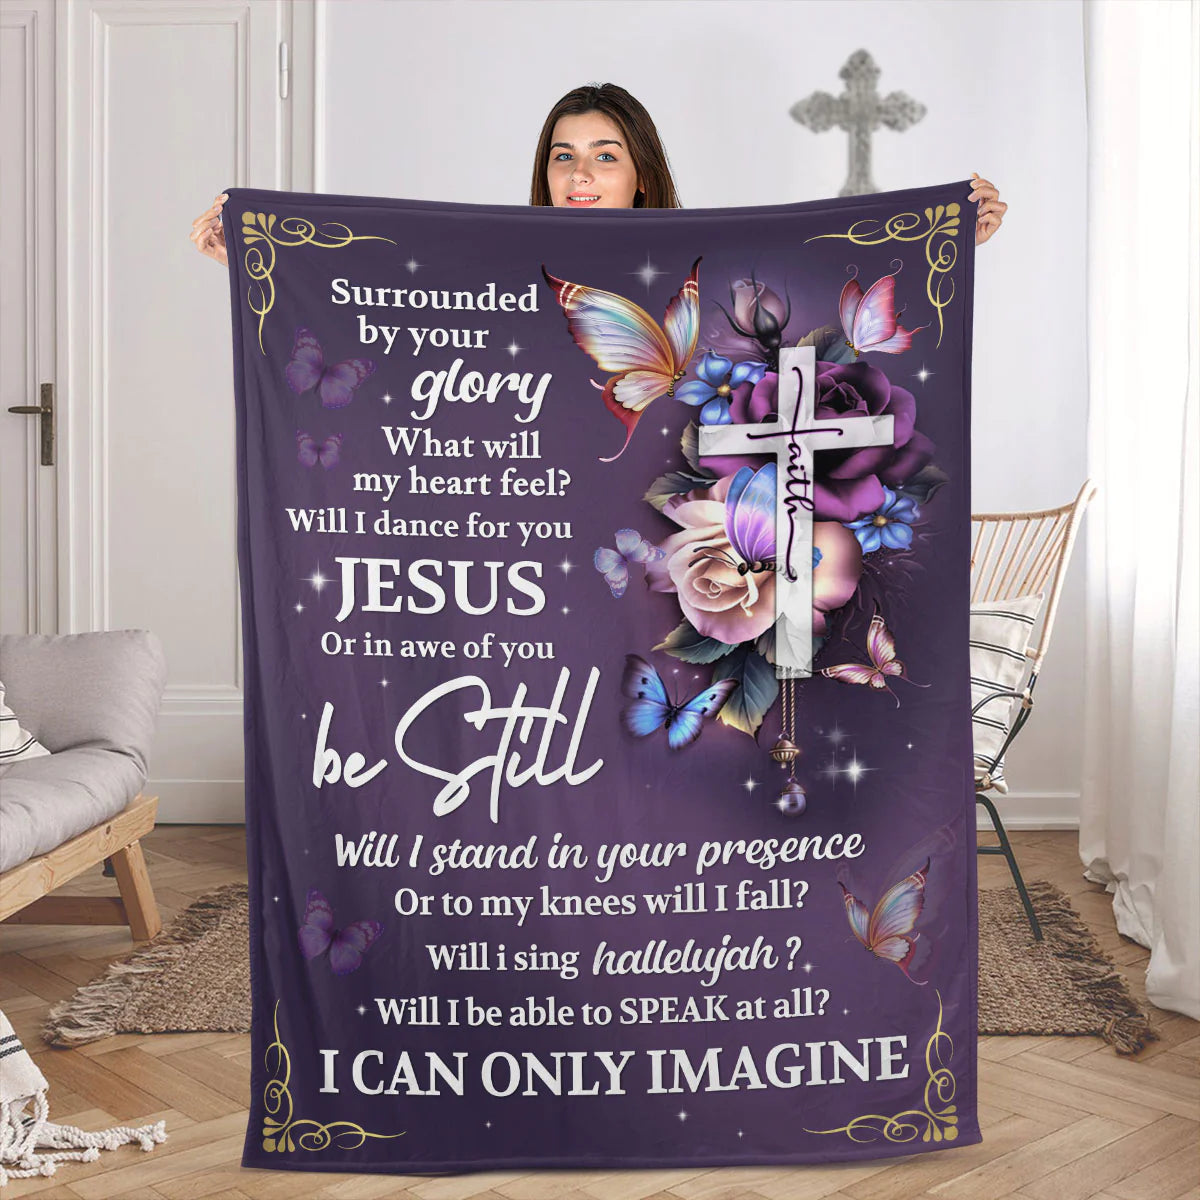 Christianart Blanket, Surrounded By Your Glory, Christian Blanket, Bible Verse Blanket, Christmas Gift, CABBK10111223. - Christian Art Bag